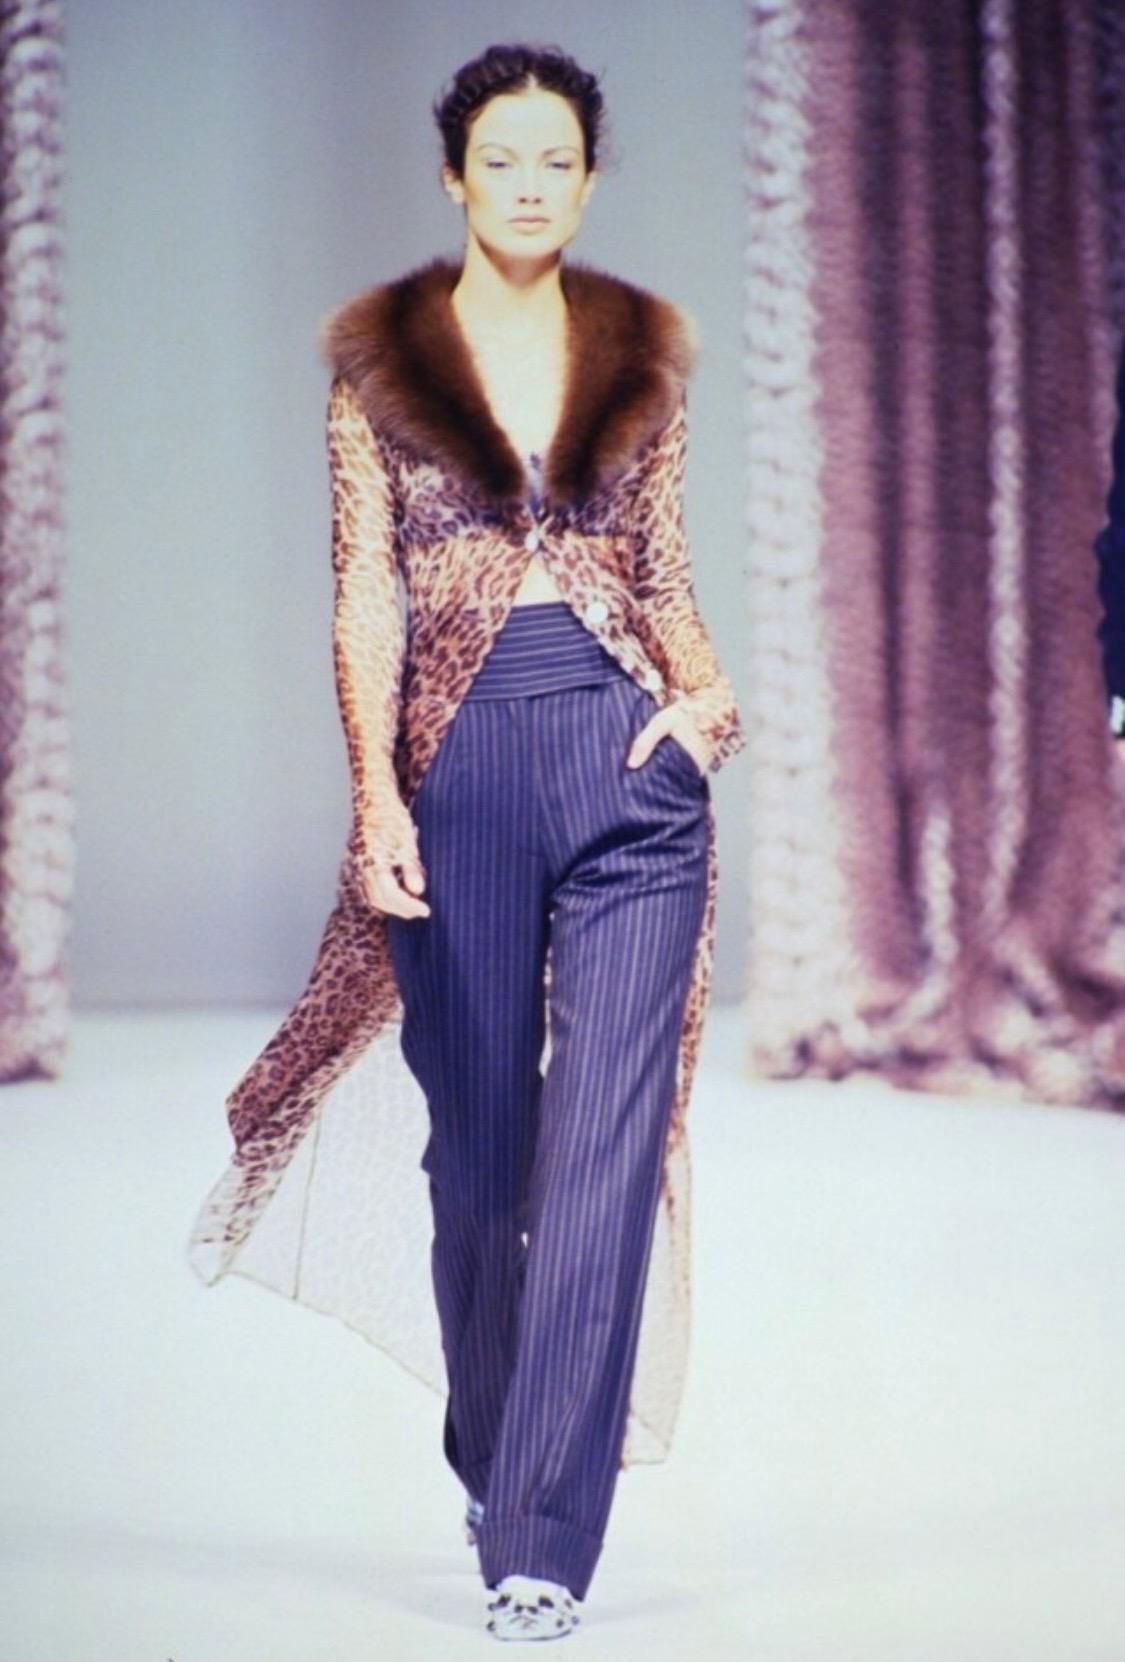 Presenting an amazing sheer cheetah print Dolce and Gabbana full-length cardigan. From the Spring/Summer 1997 collection, this cardigan debuted on the season's runway as look 2 modeled by Carolyn Murphy. The jacket was also highlighted in the